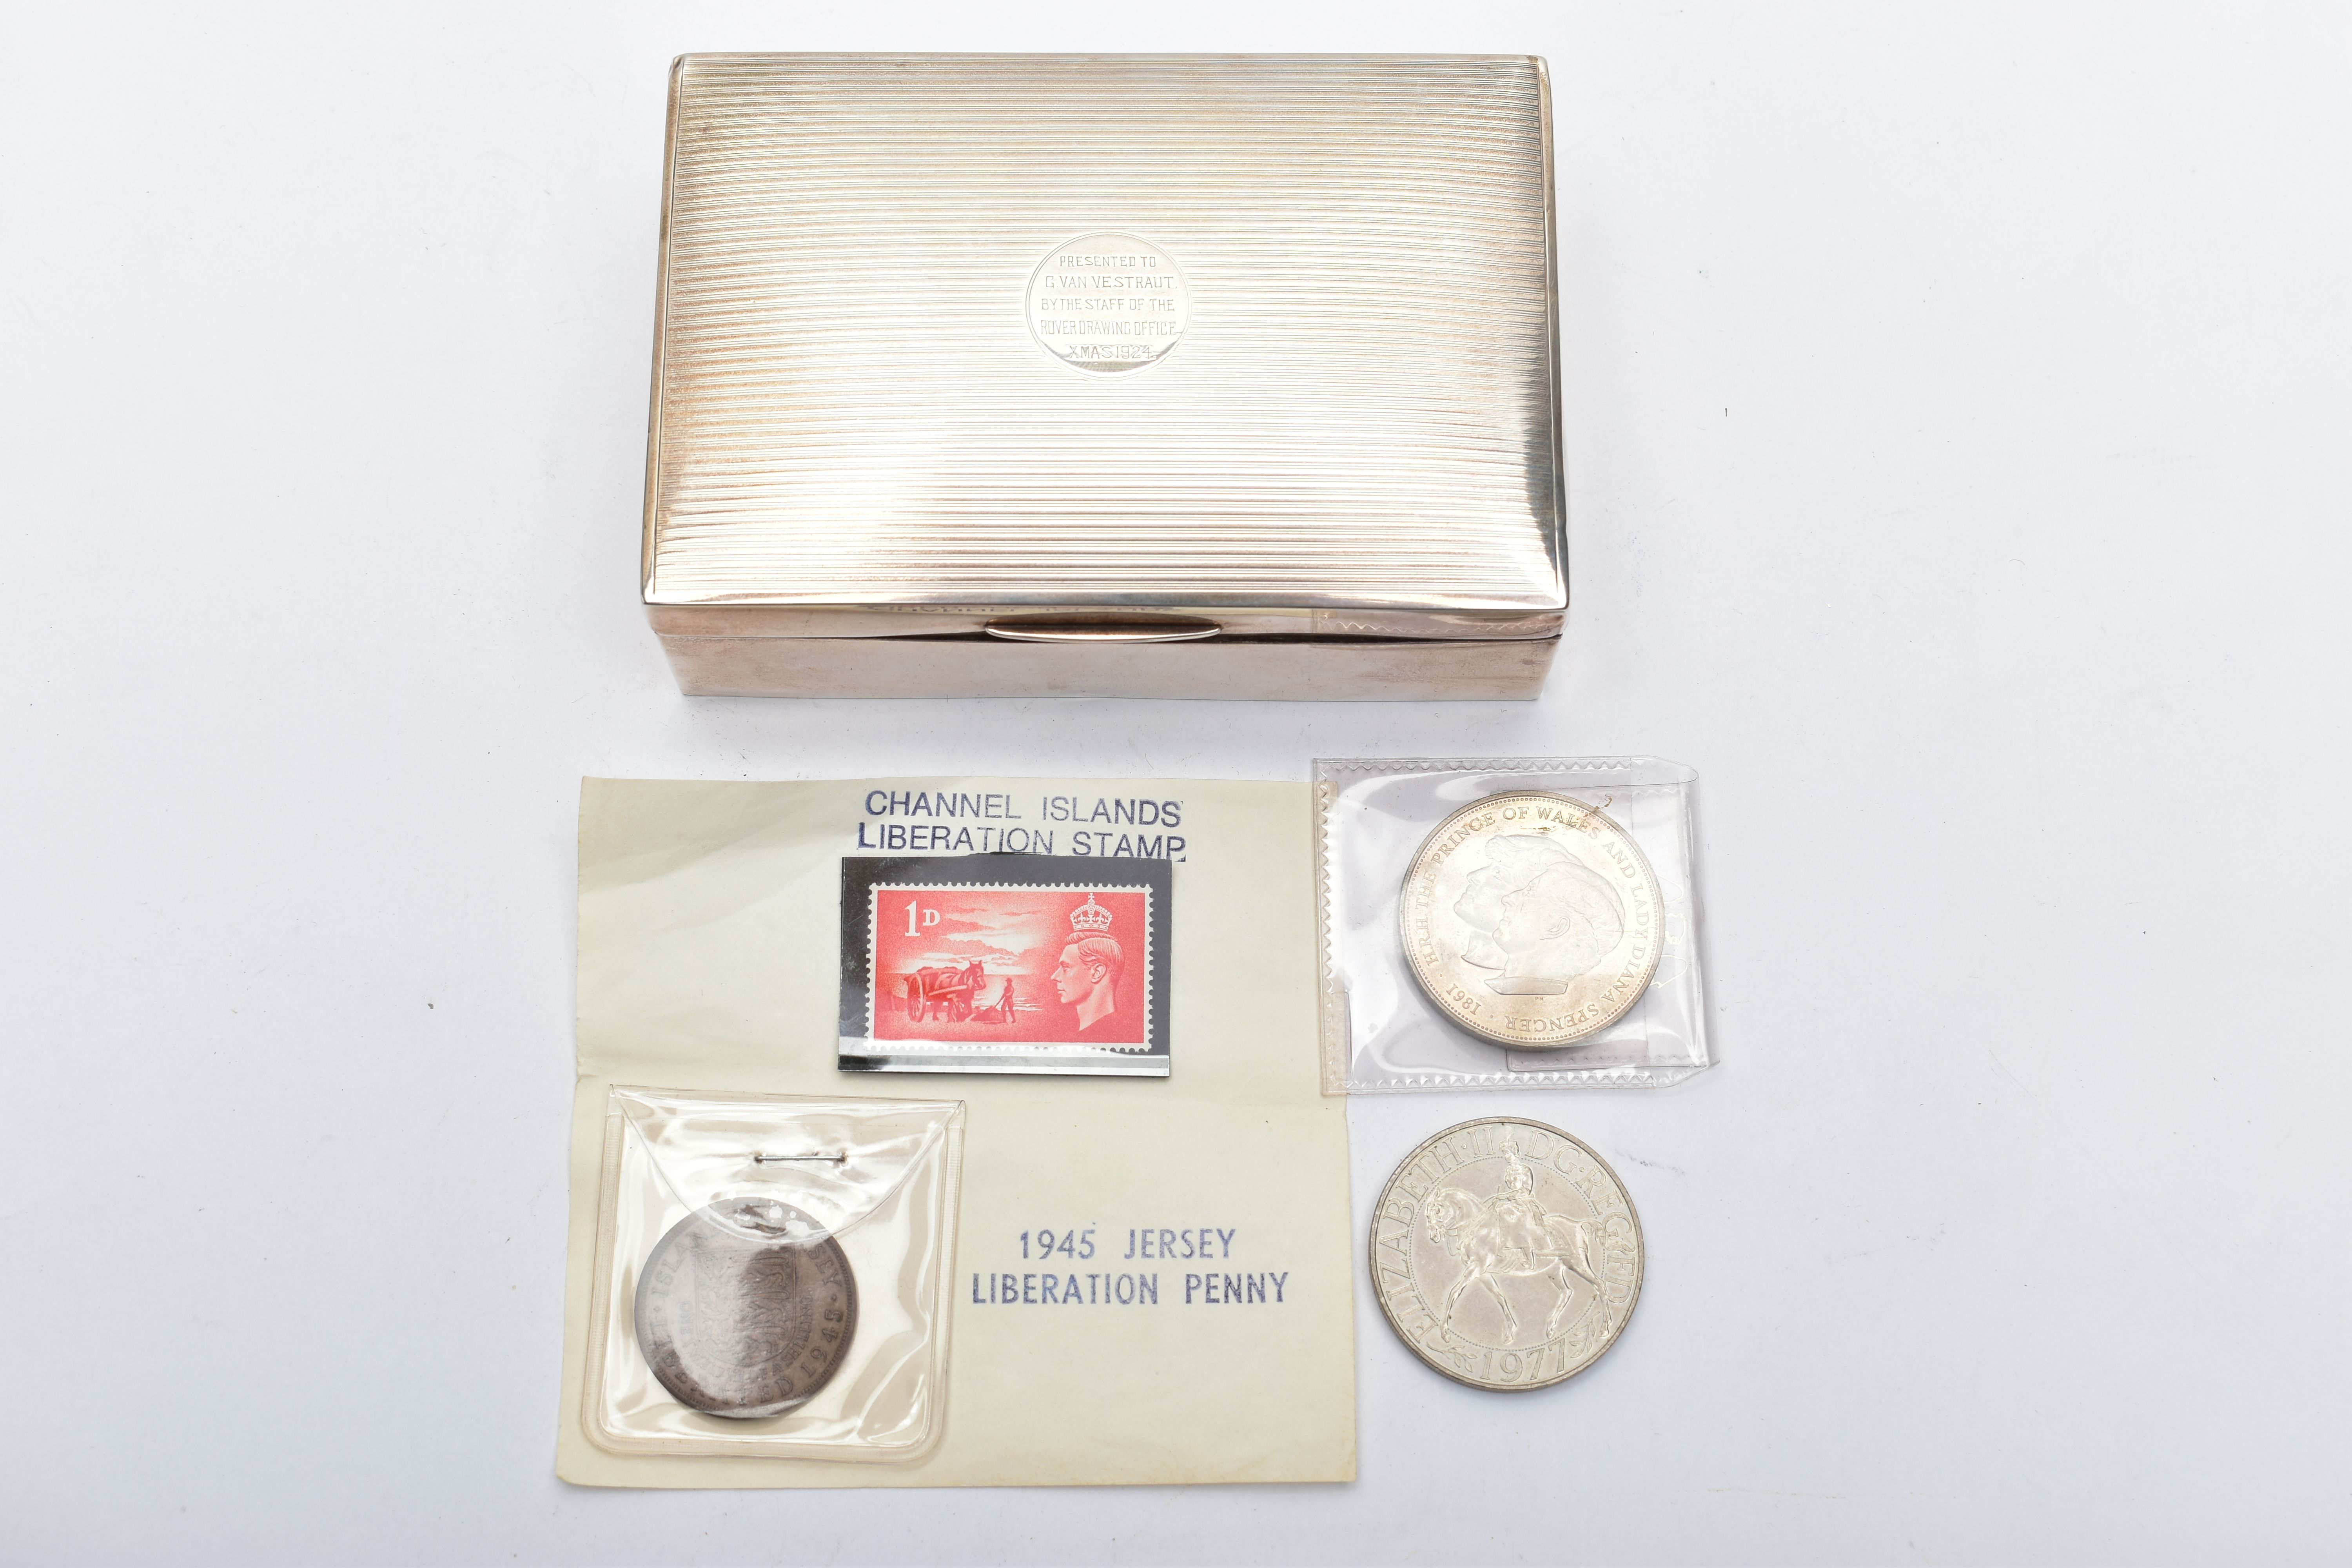 A SILVER CIGARETTE BOX AND COMMEMORATIVE COINS, rectangular cigarette case with an engine turned